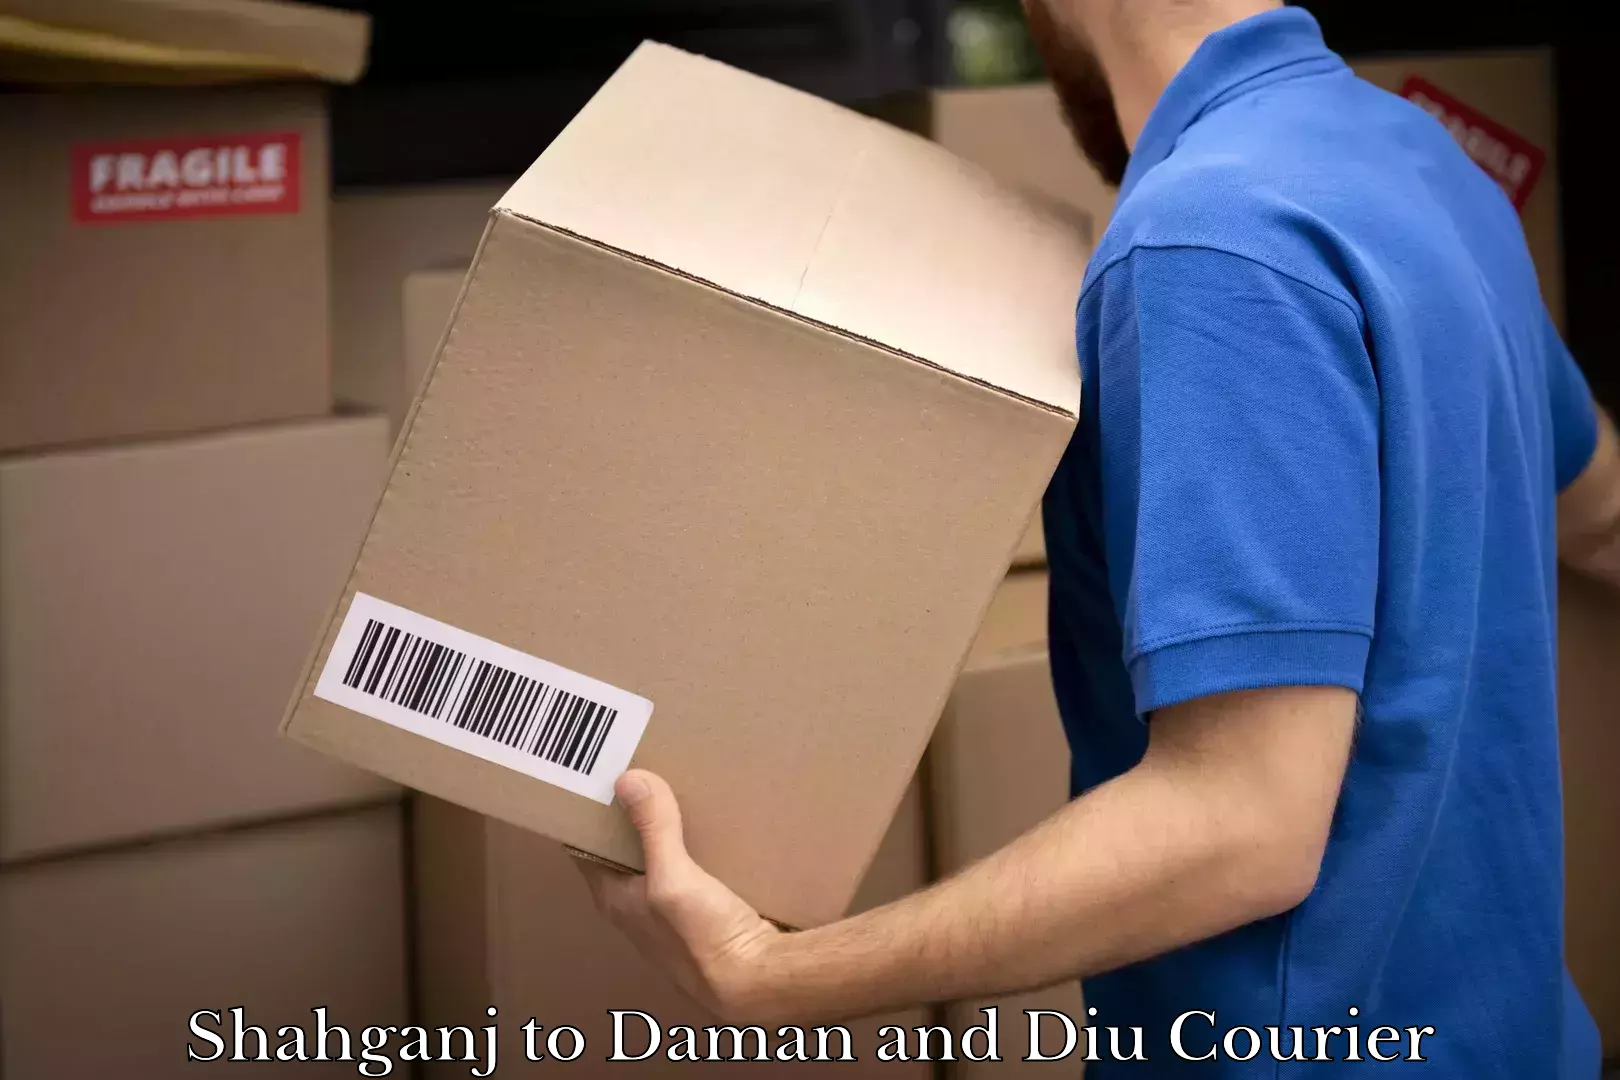 Reliable courier service Shahganj to Daman and Diu